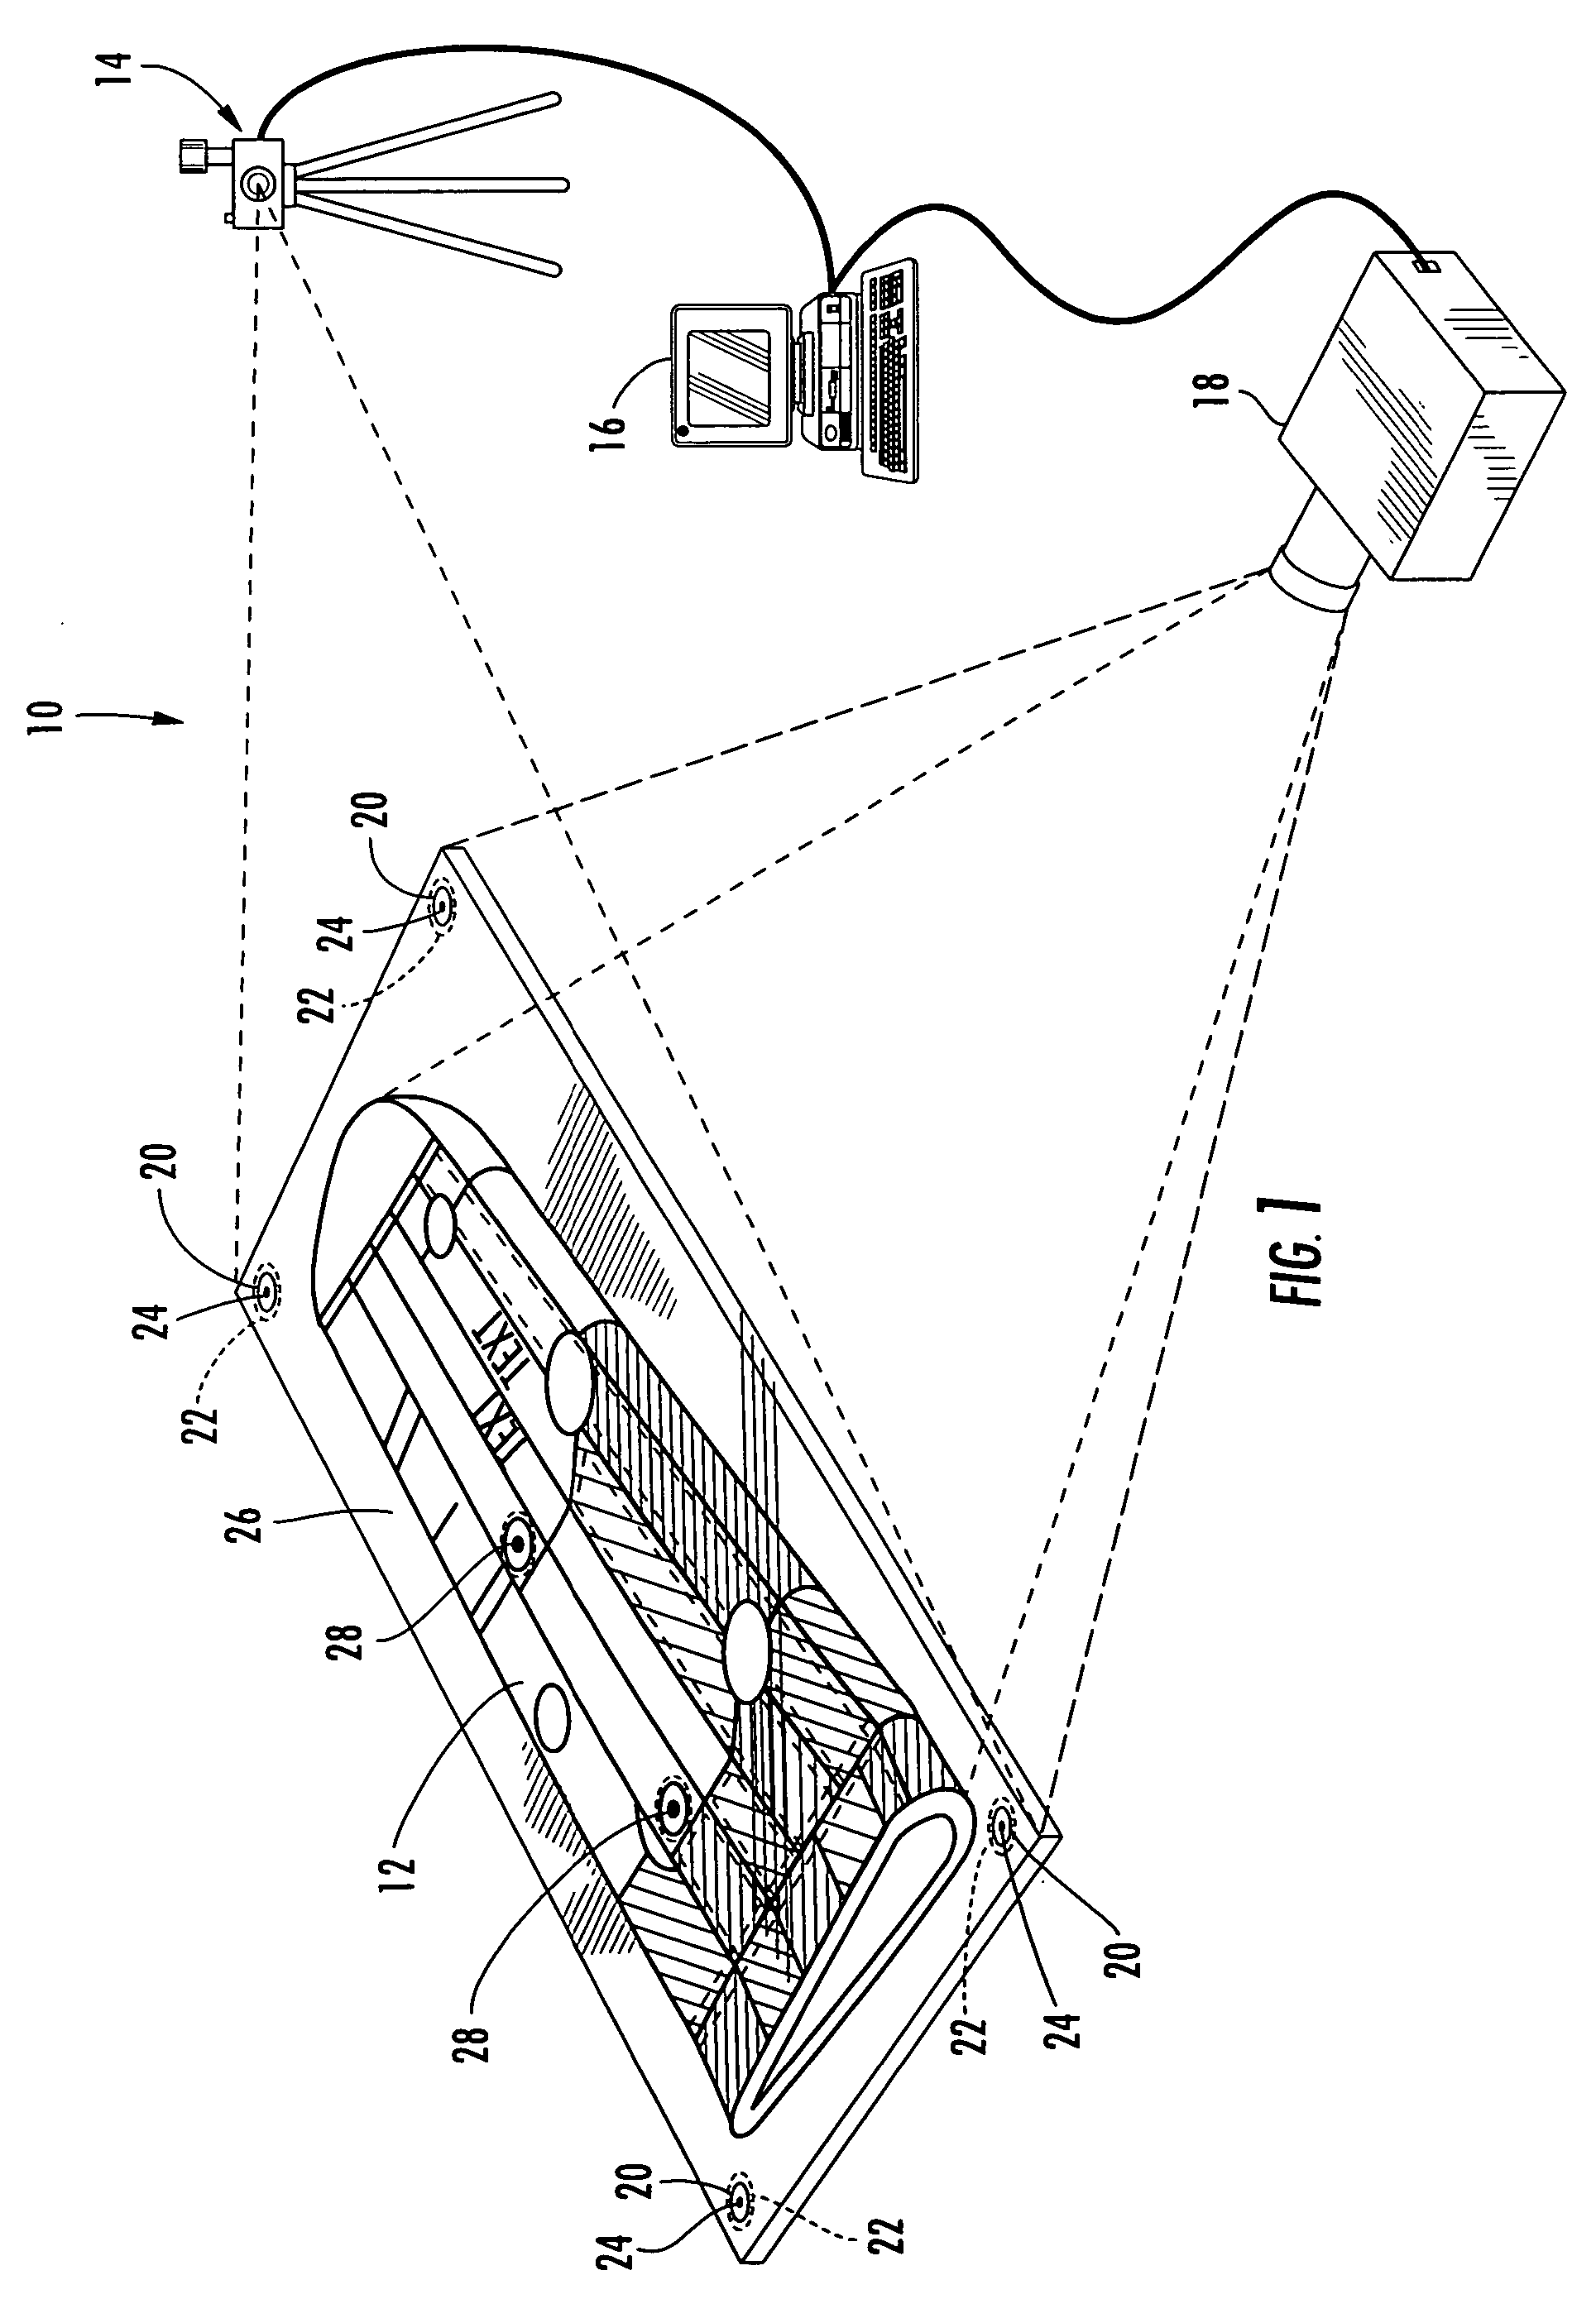 Optical projection system